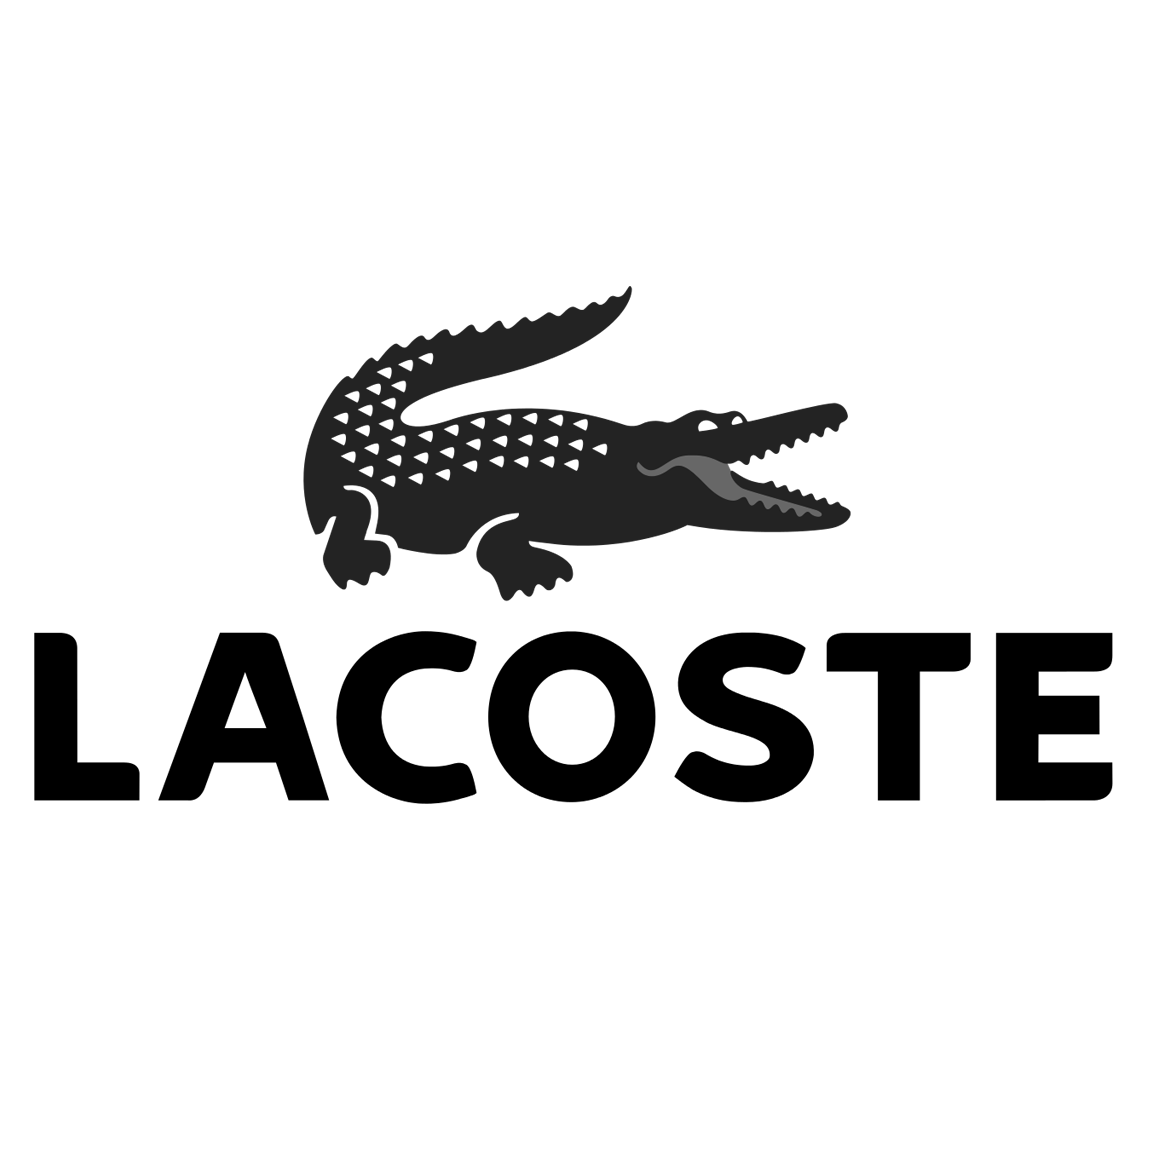 Lacoste_logo_BW.png